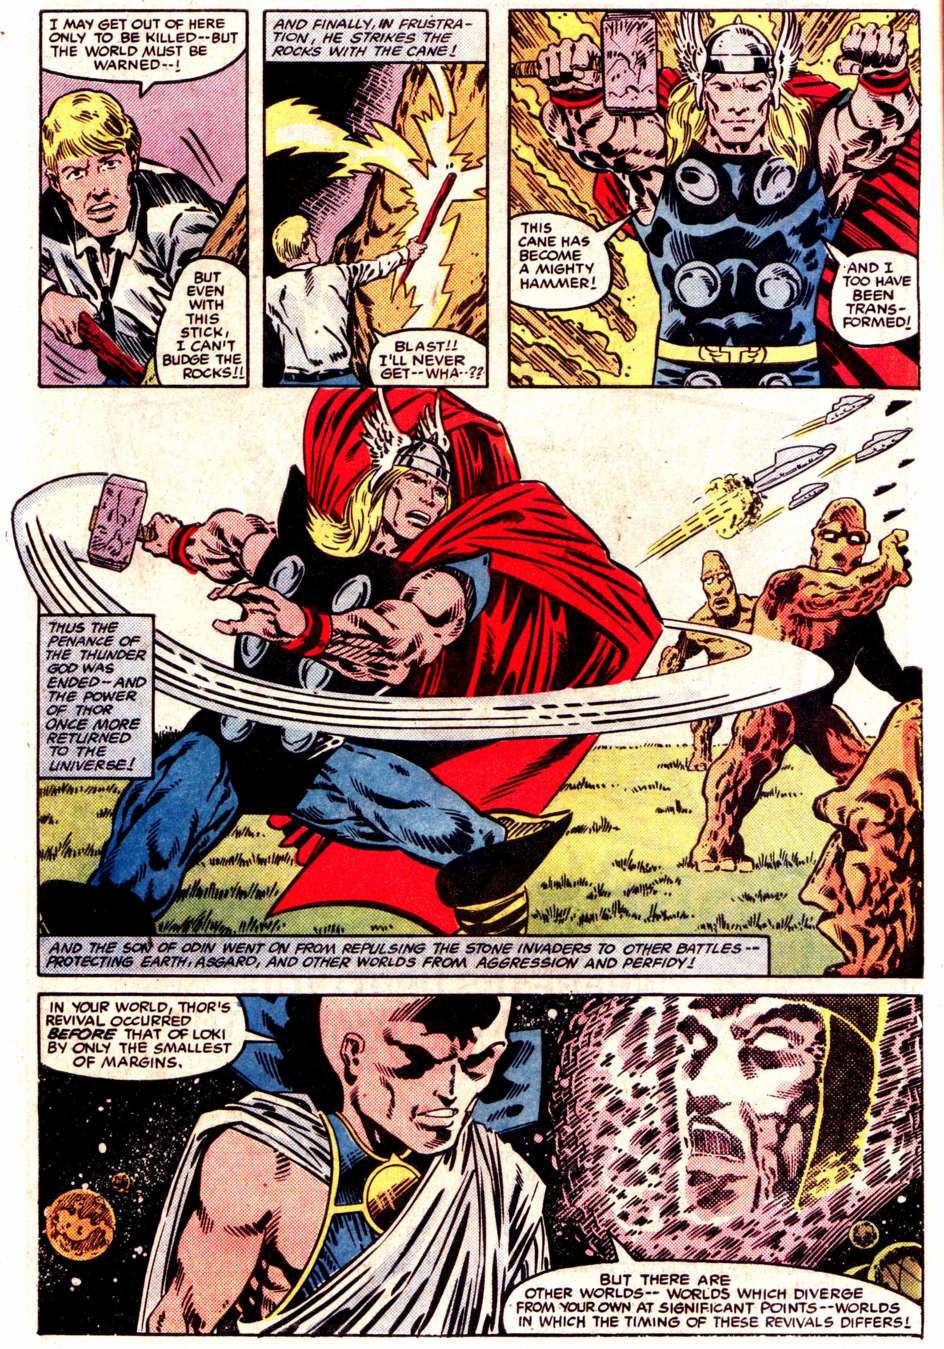 What If? (1977) issue 47 - Loki had found The hammer of Thor - Page 7